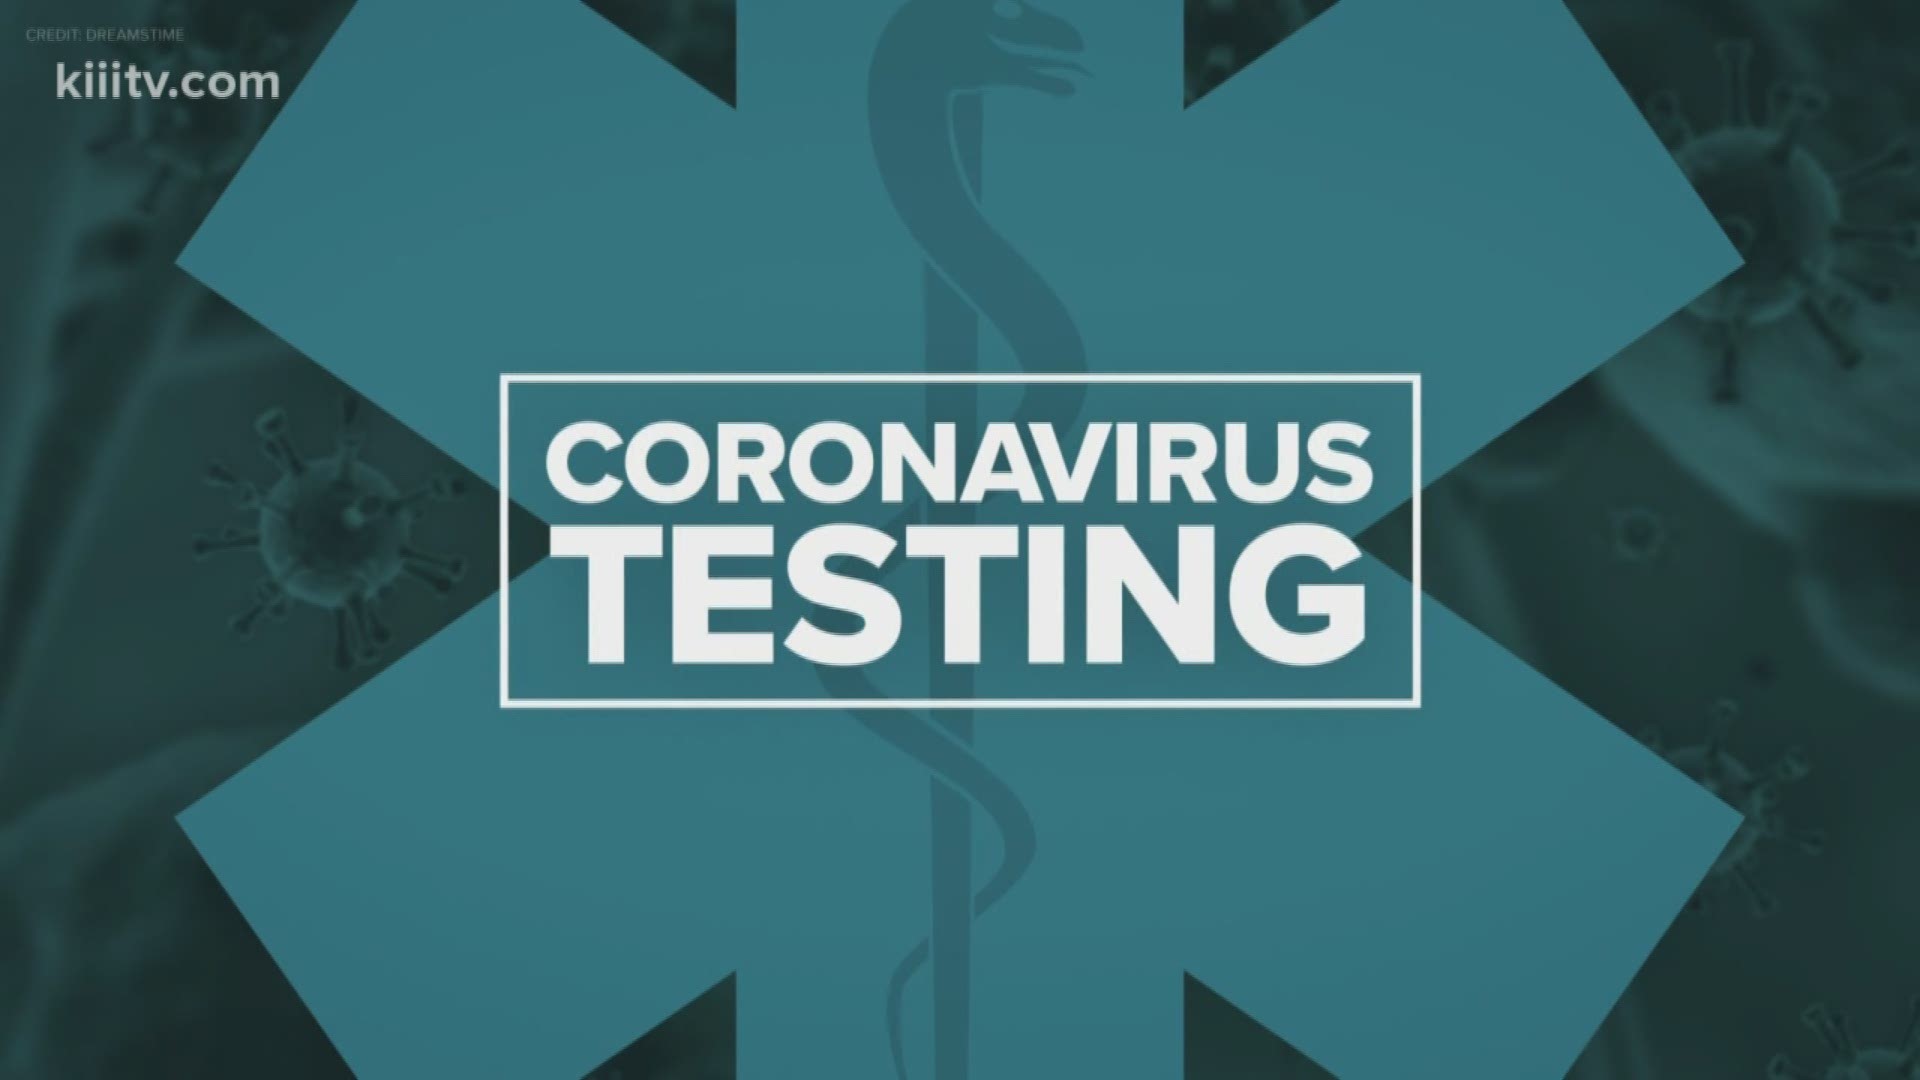 There will be another chance for anyone showing symptoms of COVID-19 to get tested this weekend.